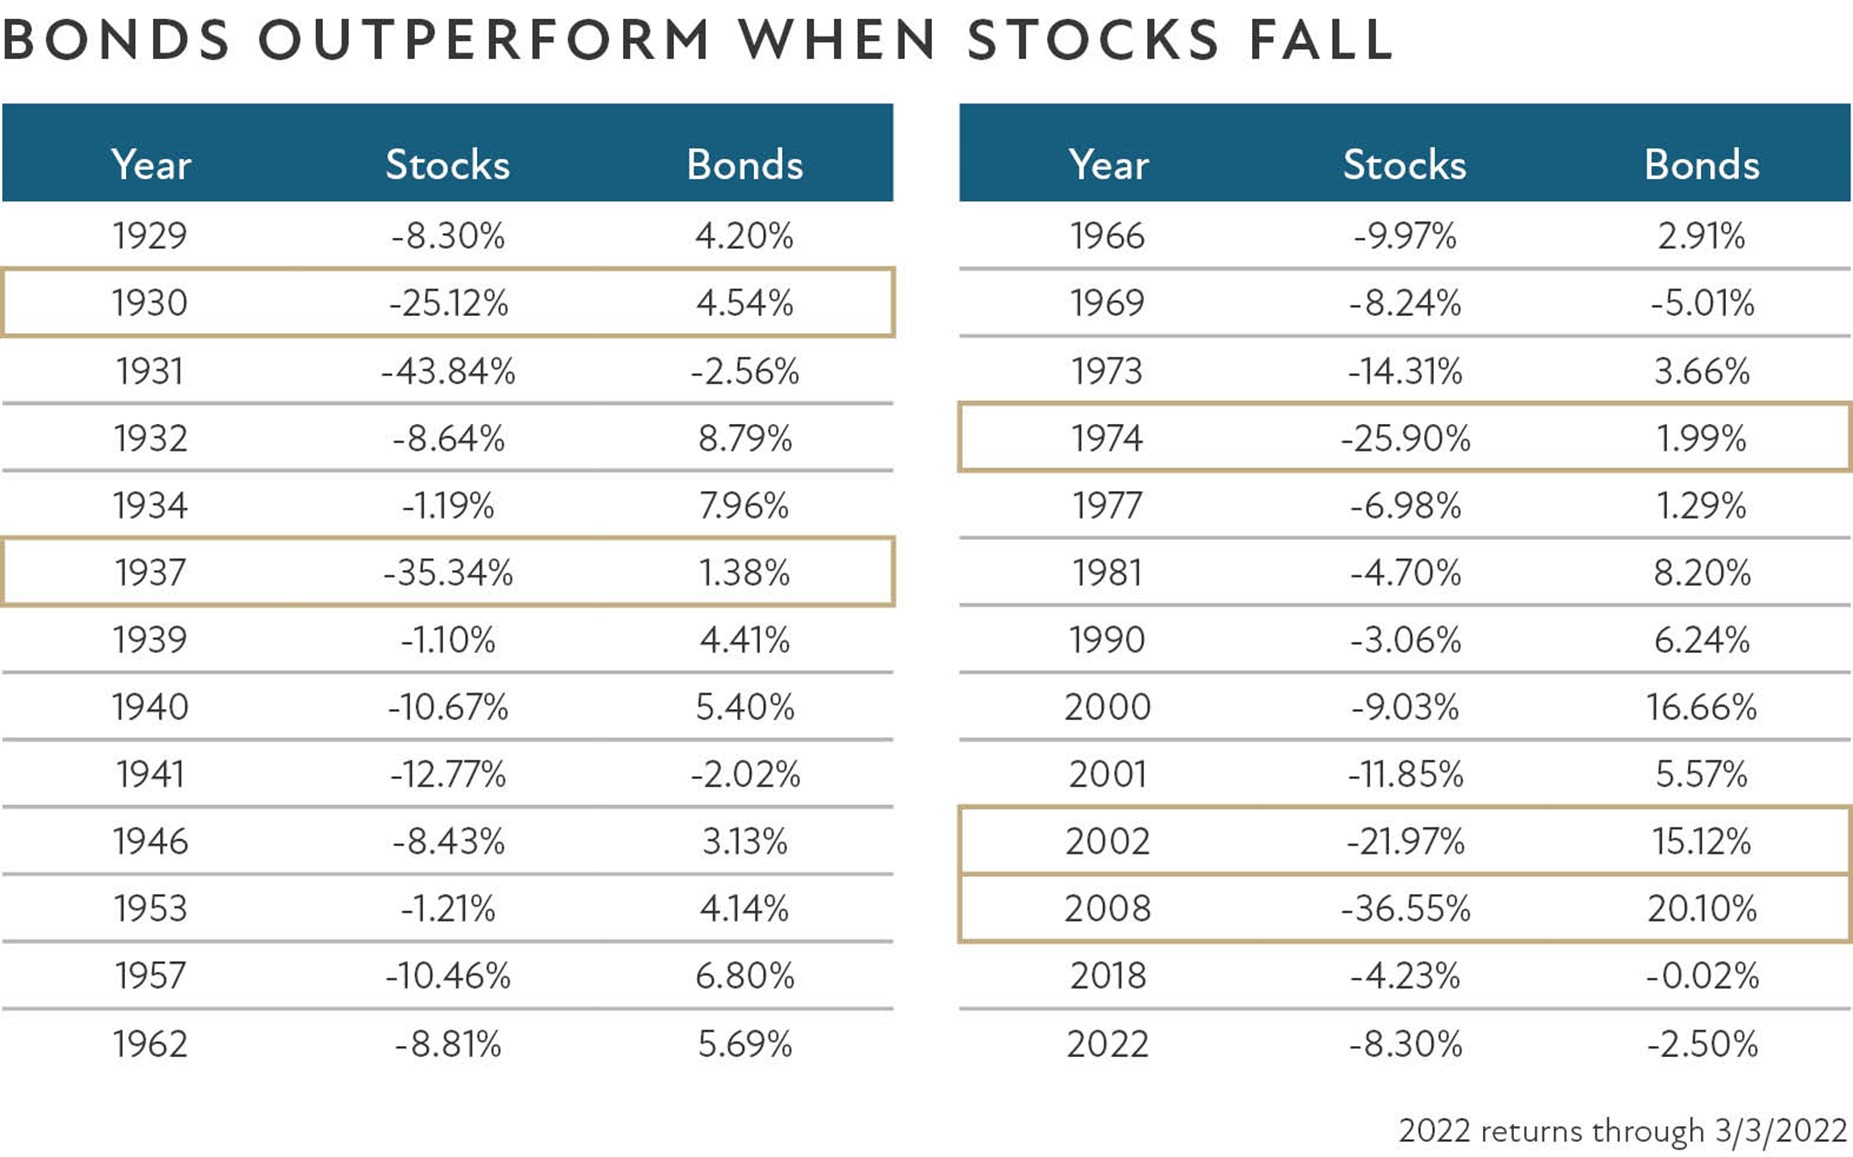 This chart shows how bonds outperform when stocks fall, such as what happened in 1930, 1937, 1974, 2002 and 2008.